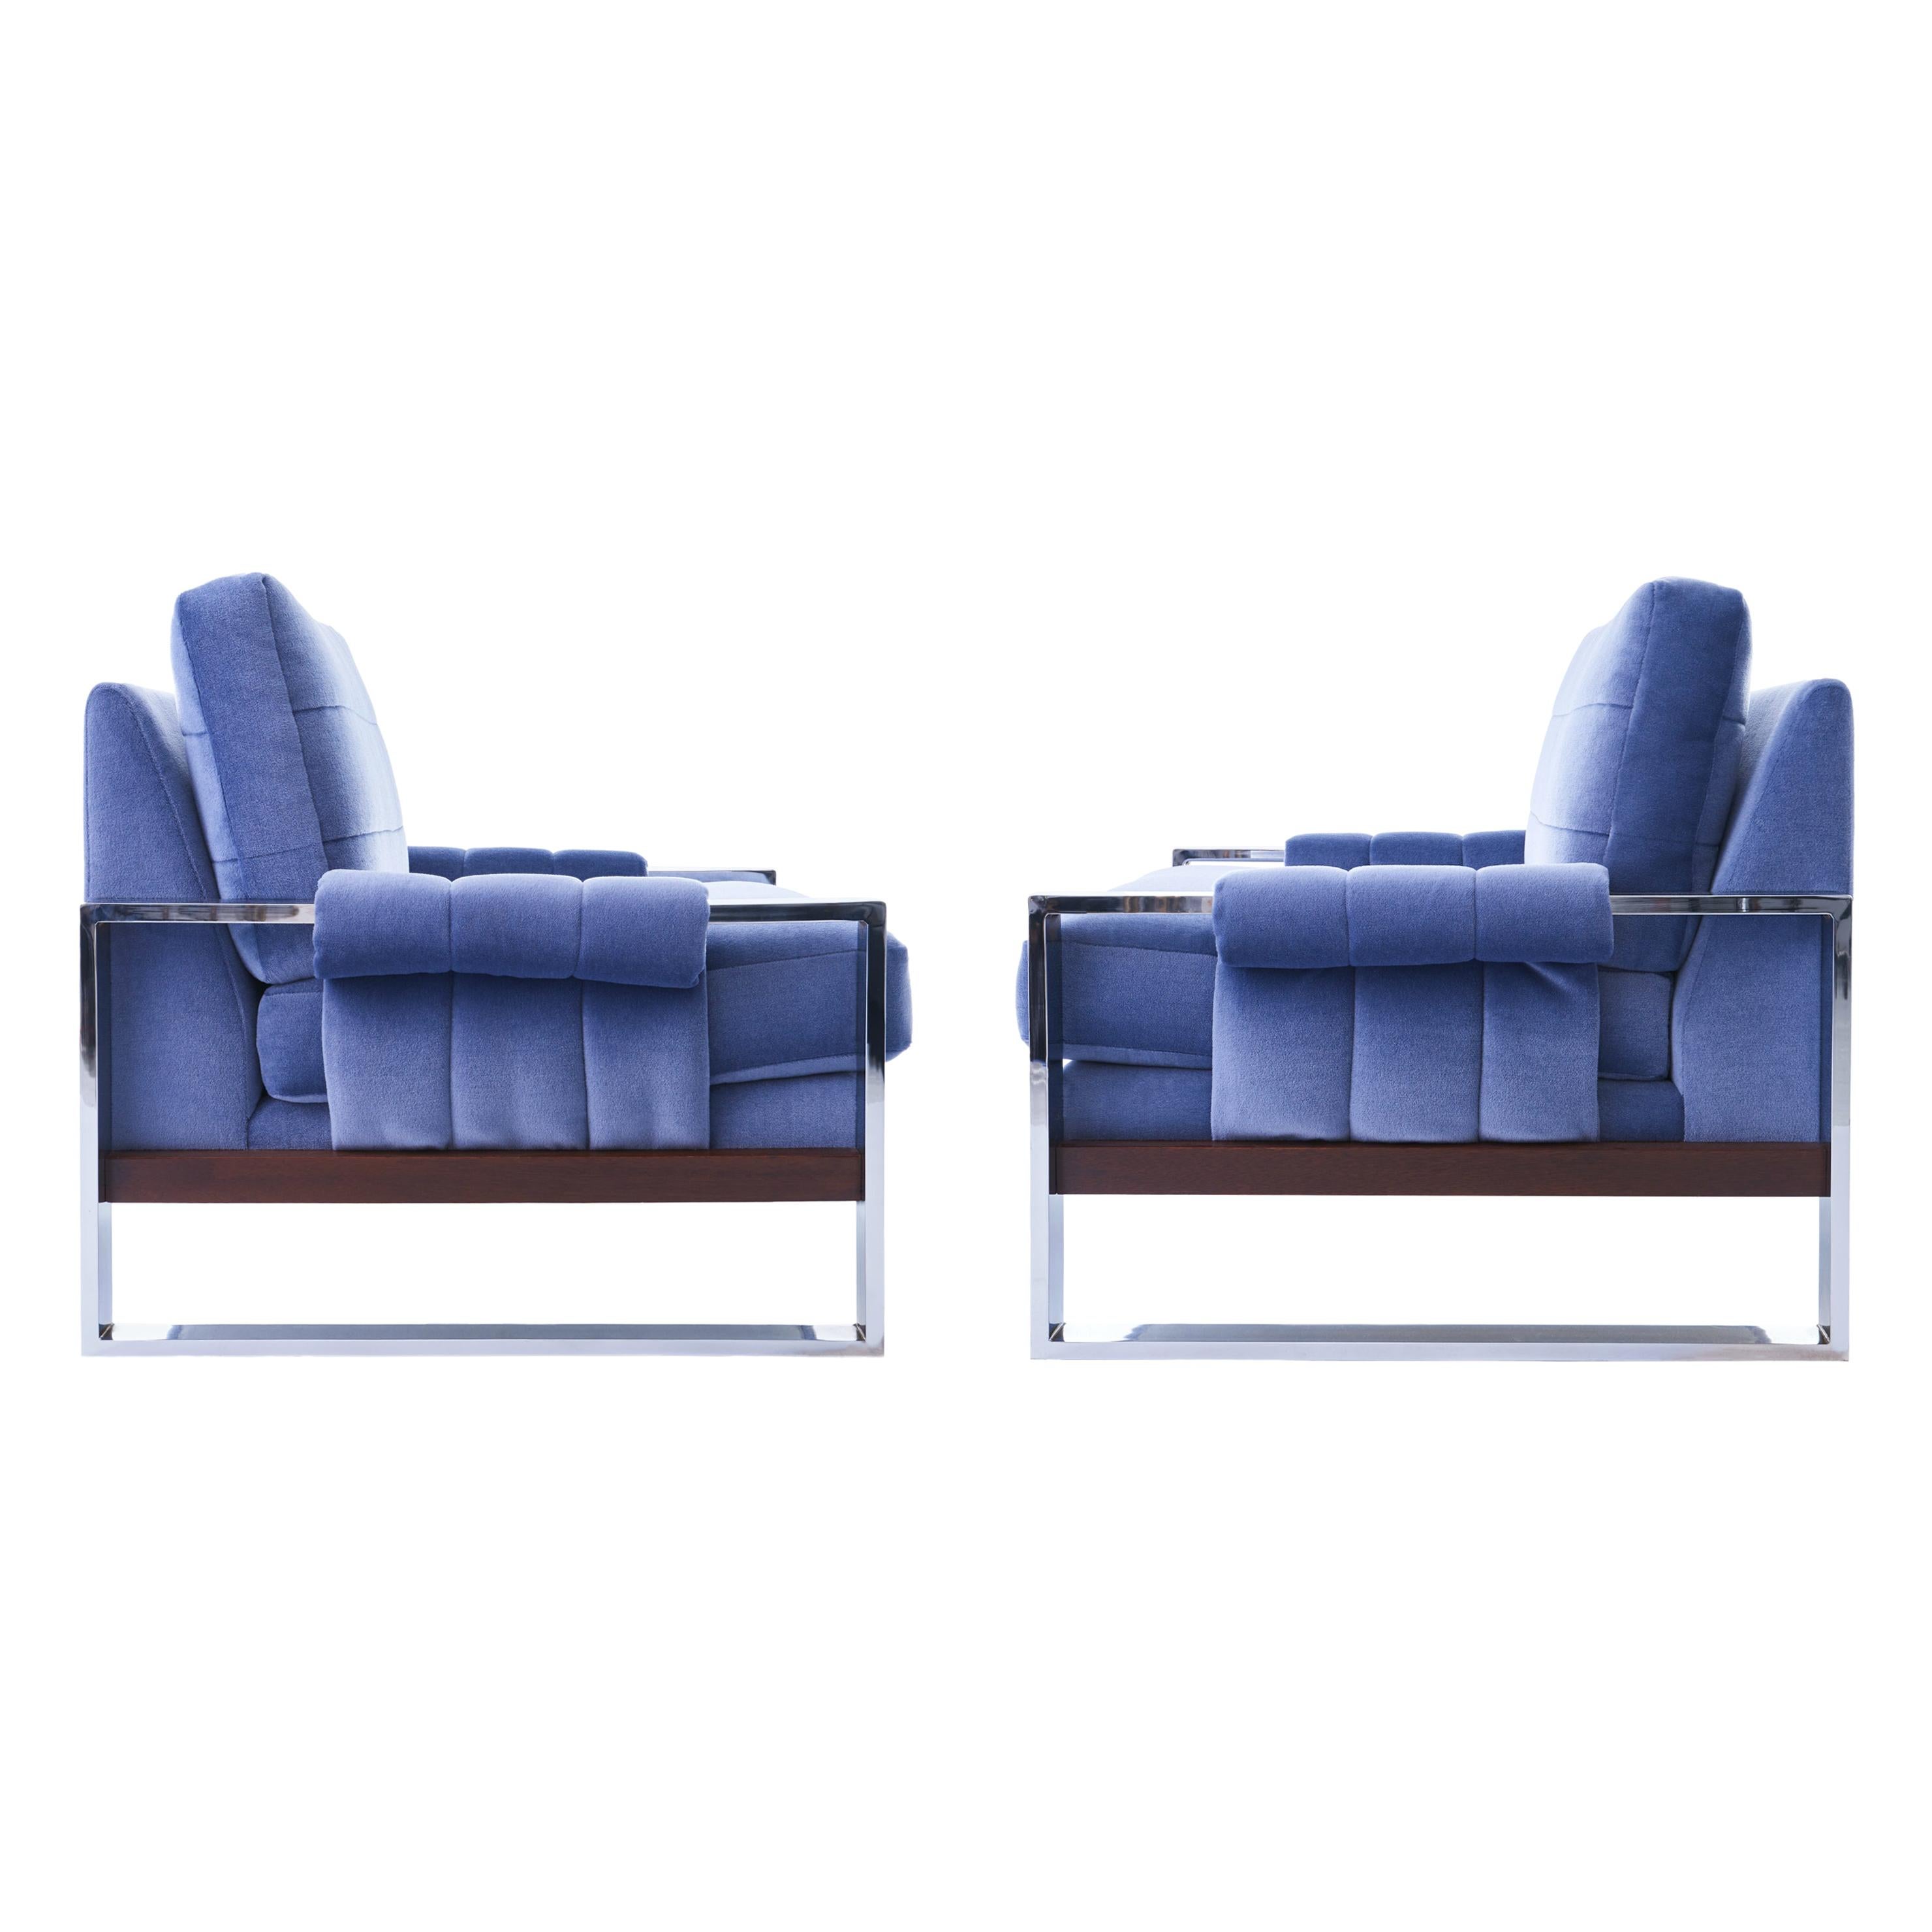 Adrian Pearsall for Craft Associates Mohair, Wood and Chrome Lounge Chair, Pair